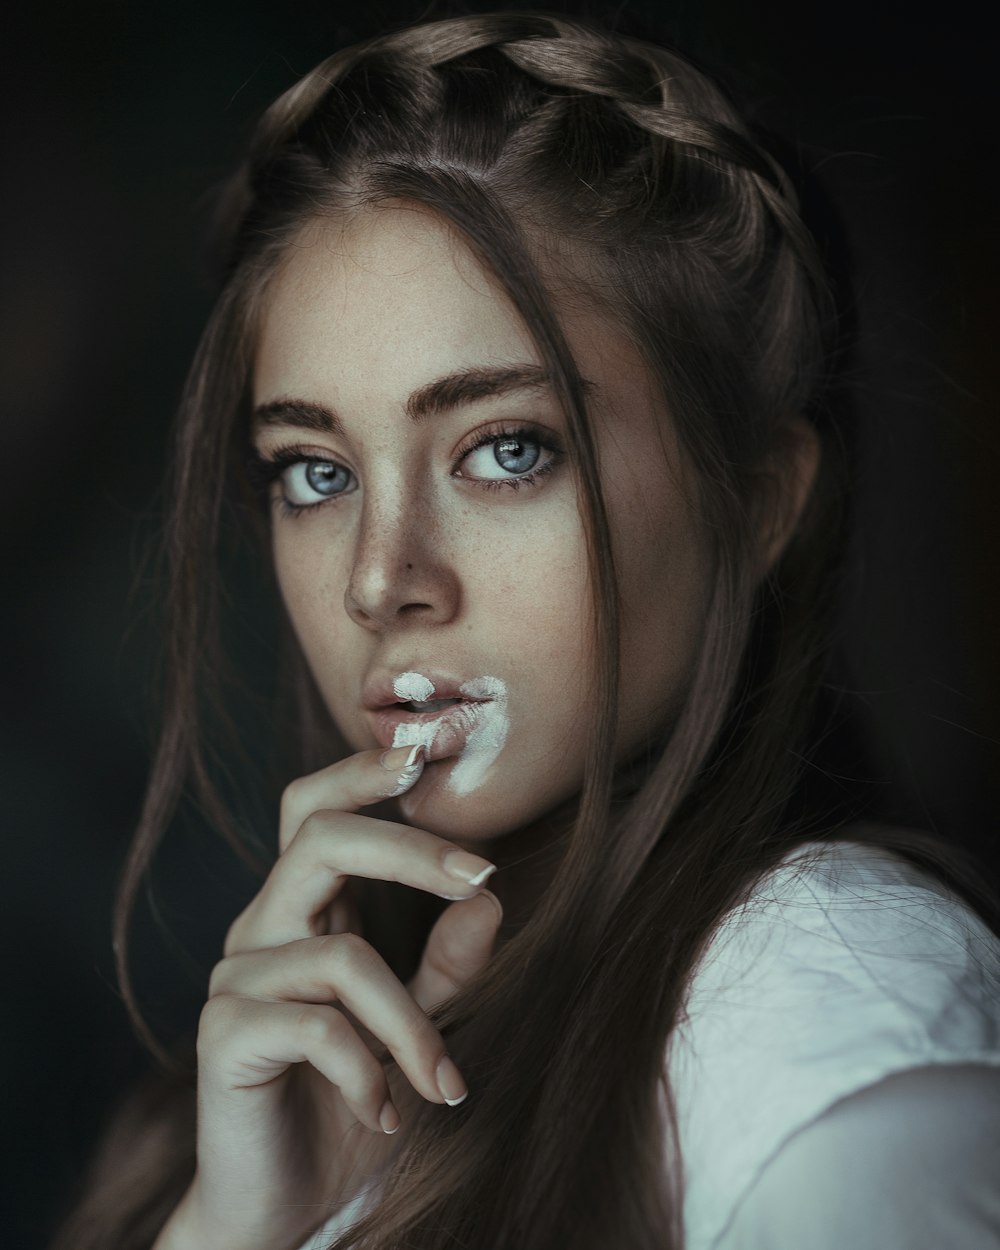 a woman with blue eyes is brushing her teeth